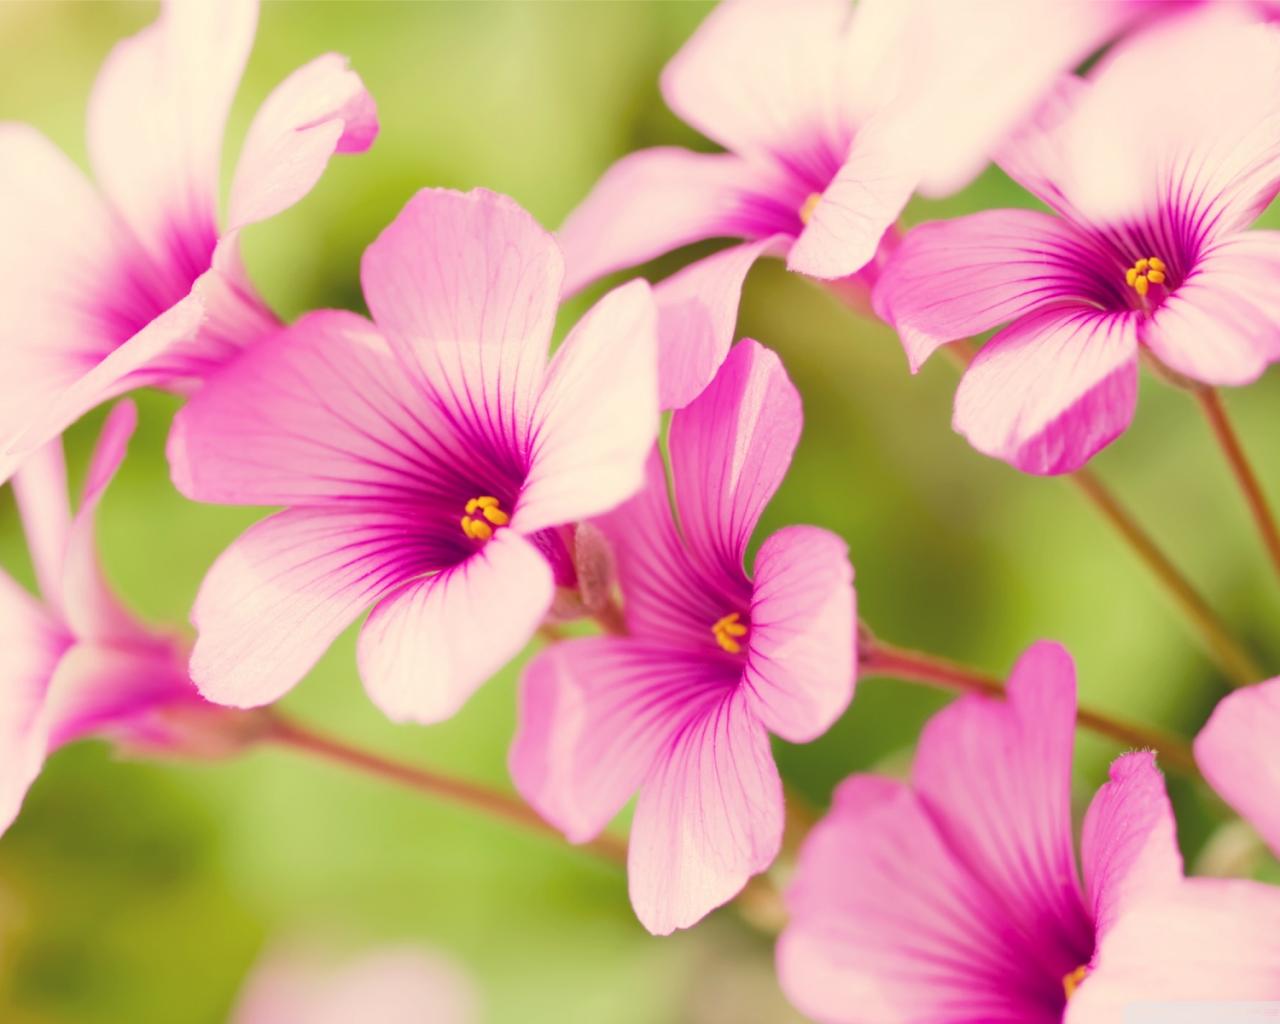 Hd Wallpapers Flowers Free Download.